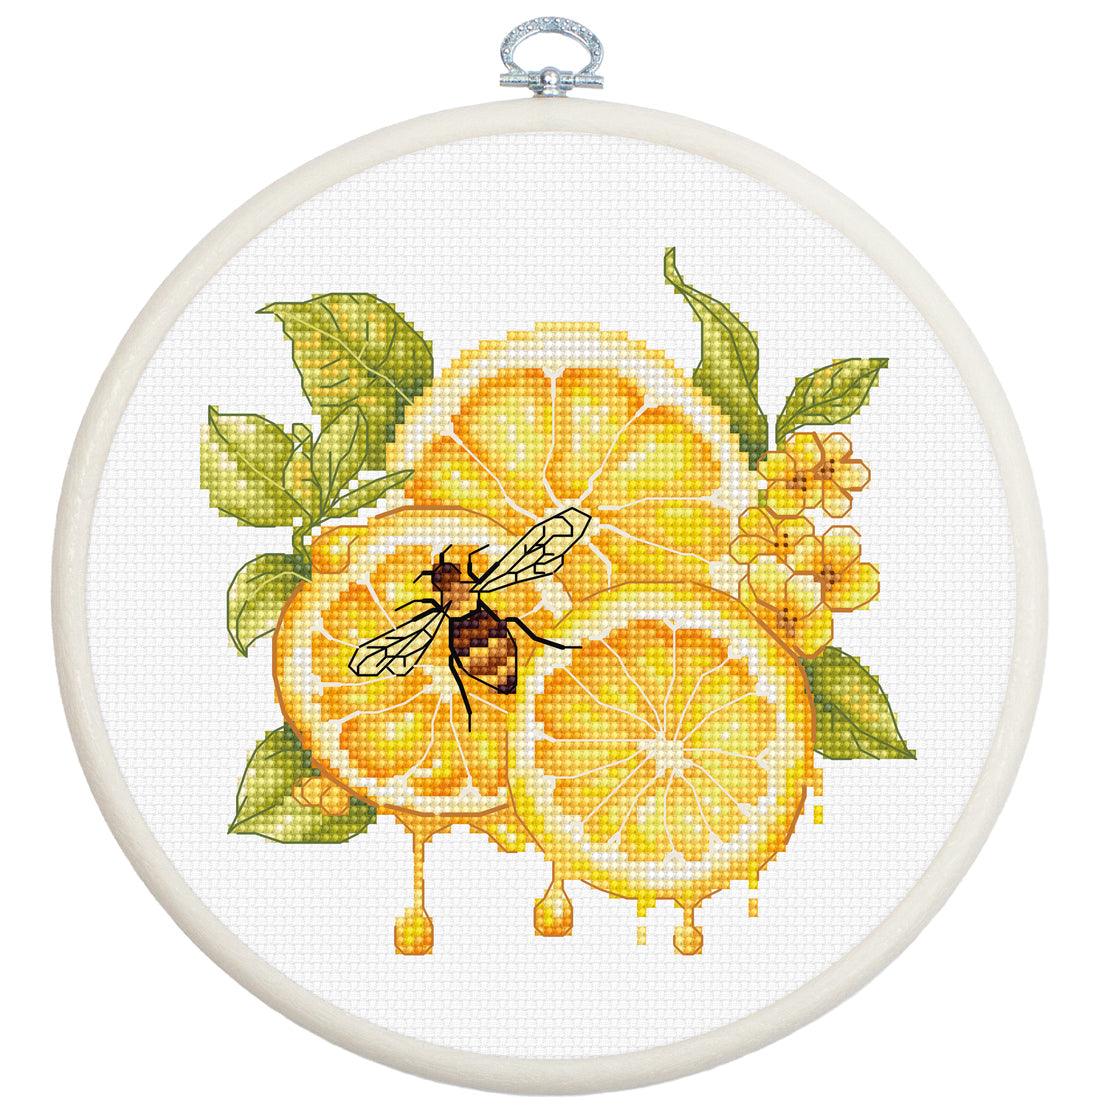 Cross Stitch Kit with Hoop Included Luca-S - The Lemon Juice, BC234 - Luca-S Cross Stitch Kits